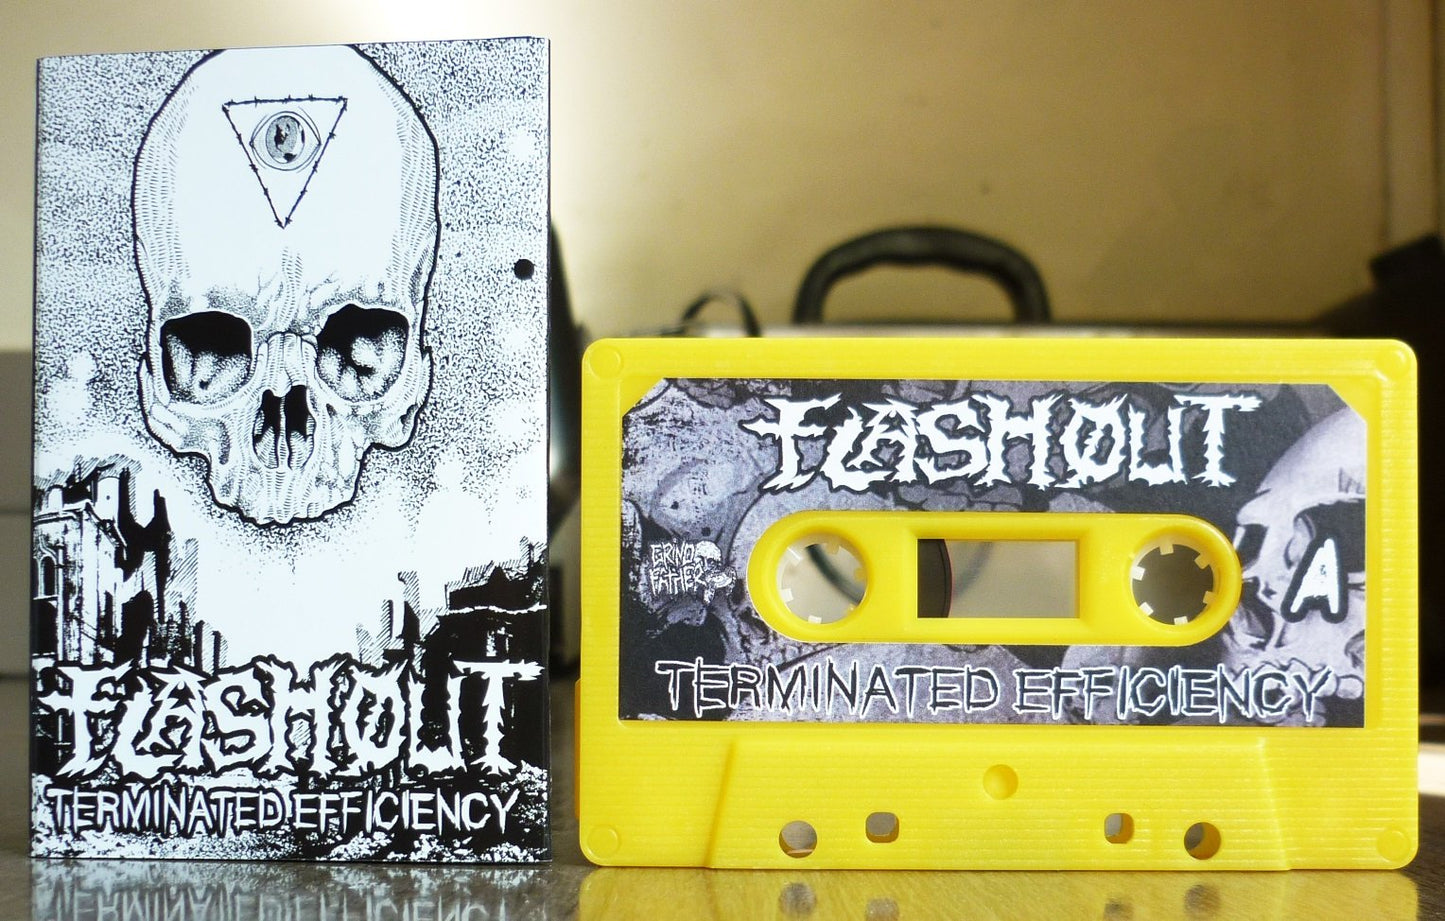 FLASHOUT "Terminated Efficiency" Tape